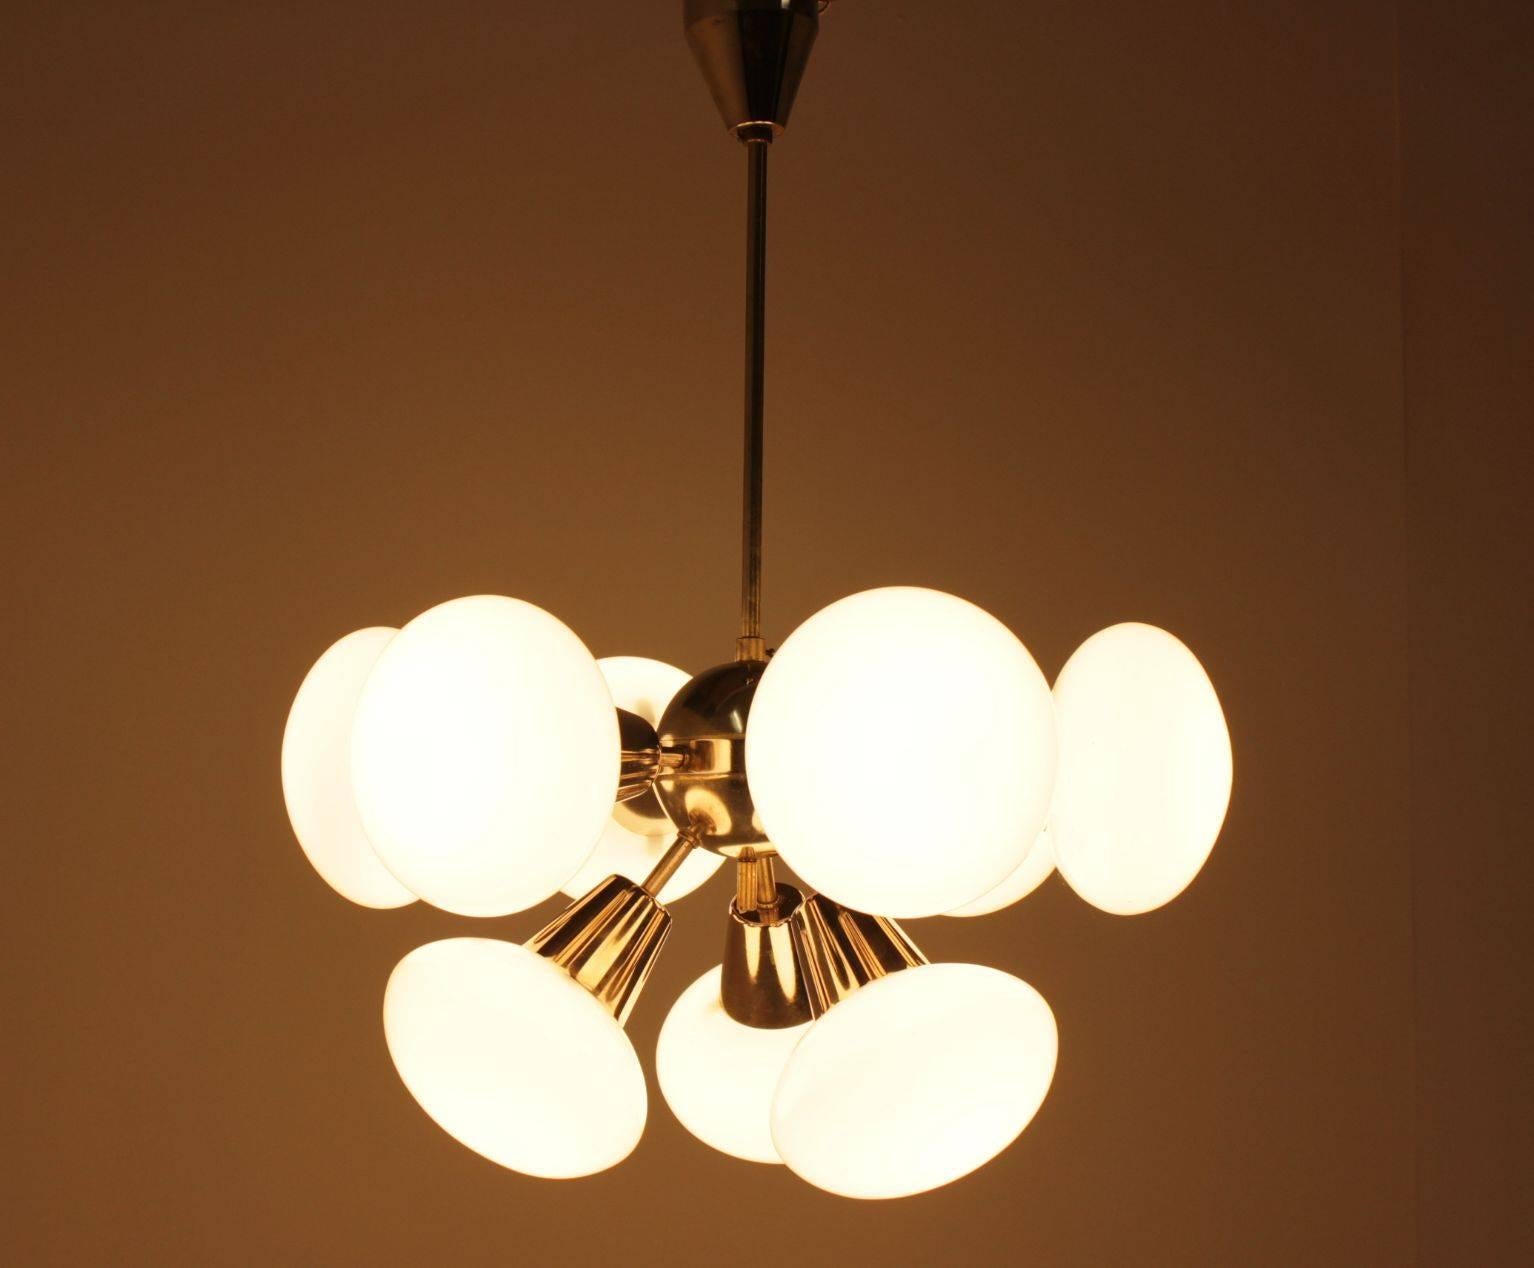 Very nice style of lighting. Marked by paper label.